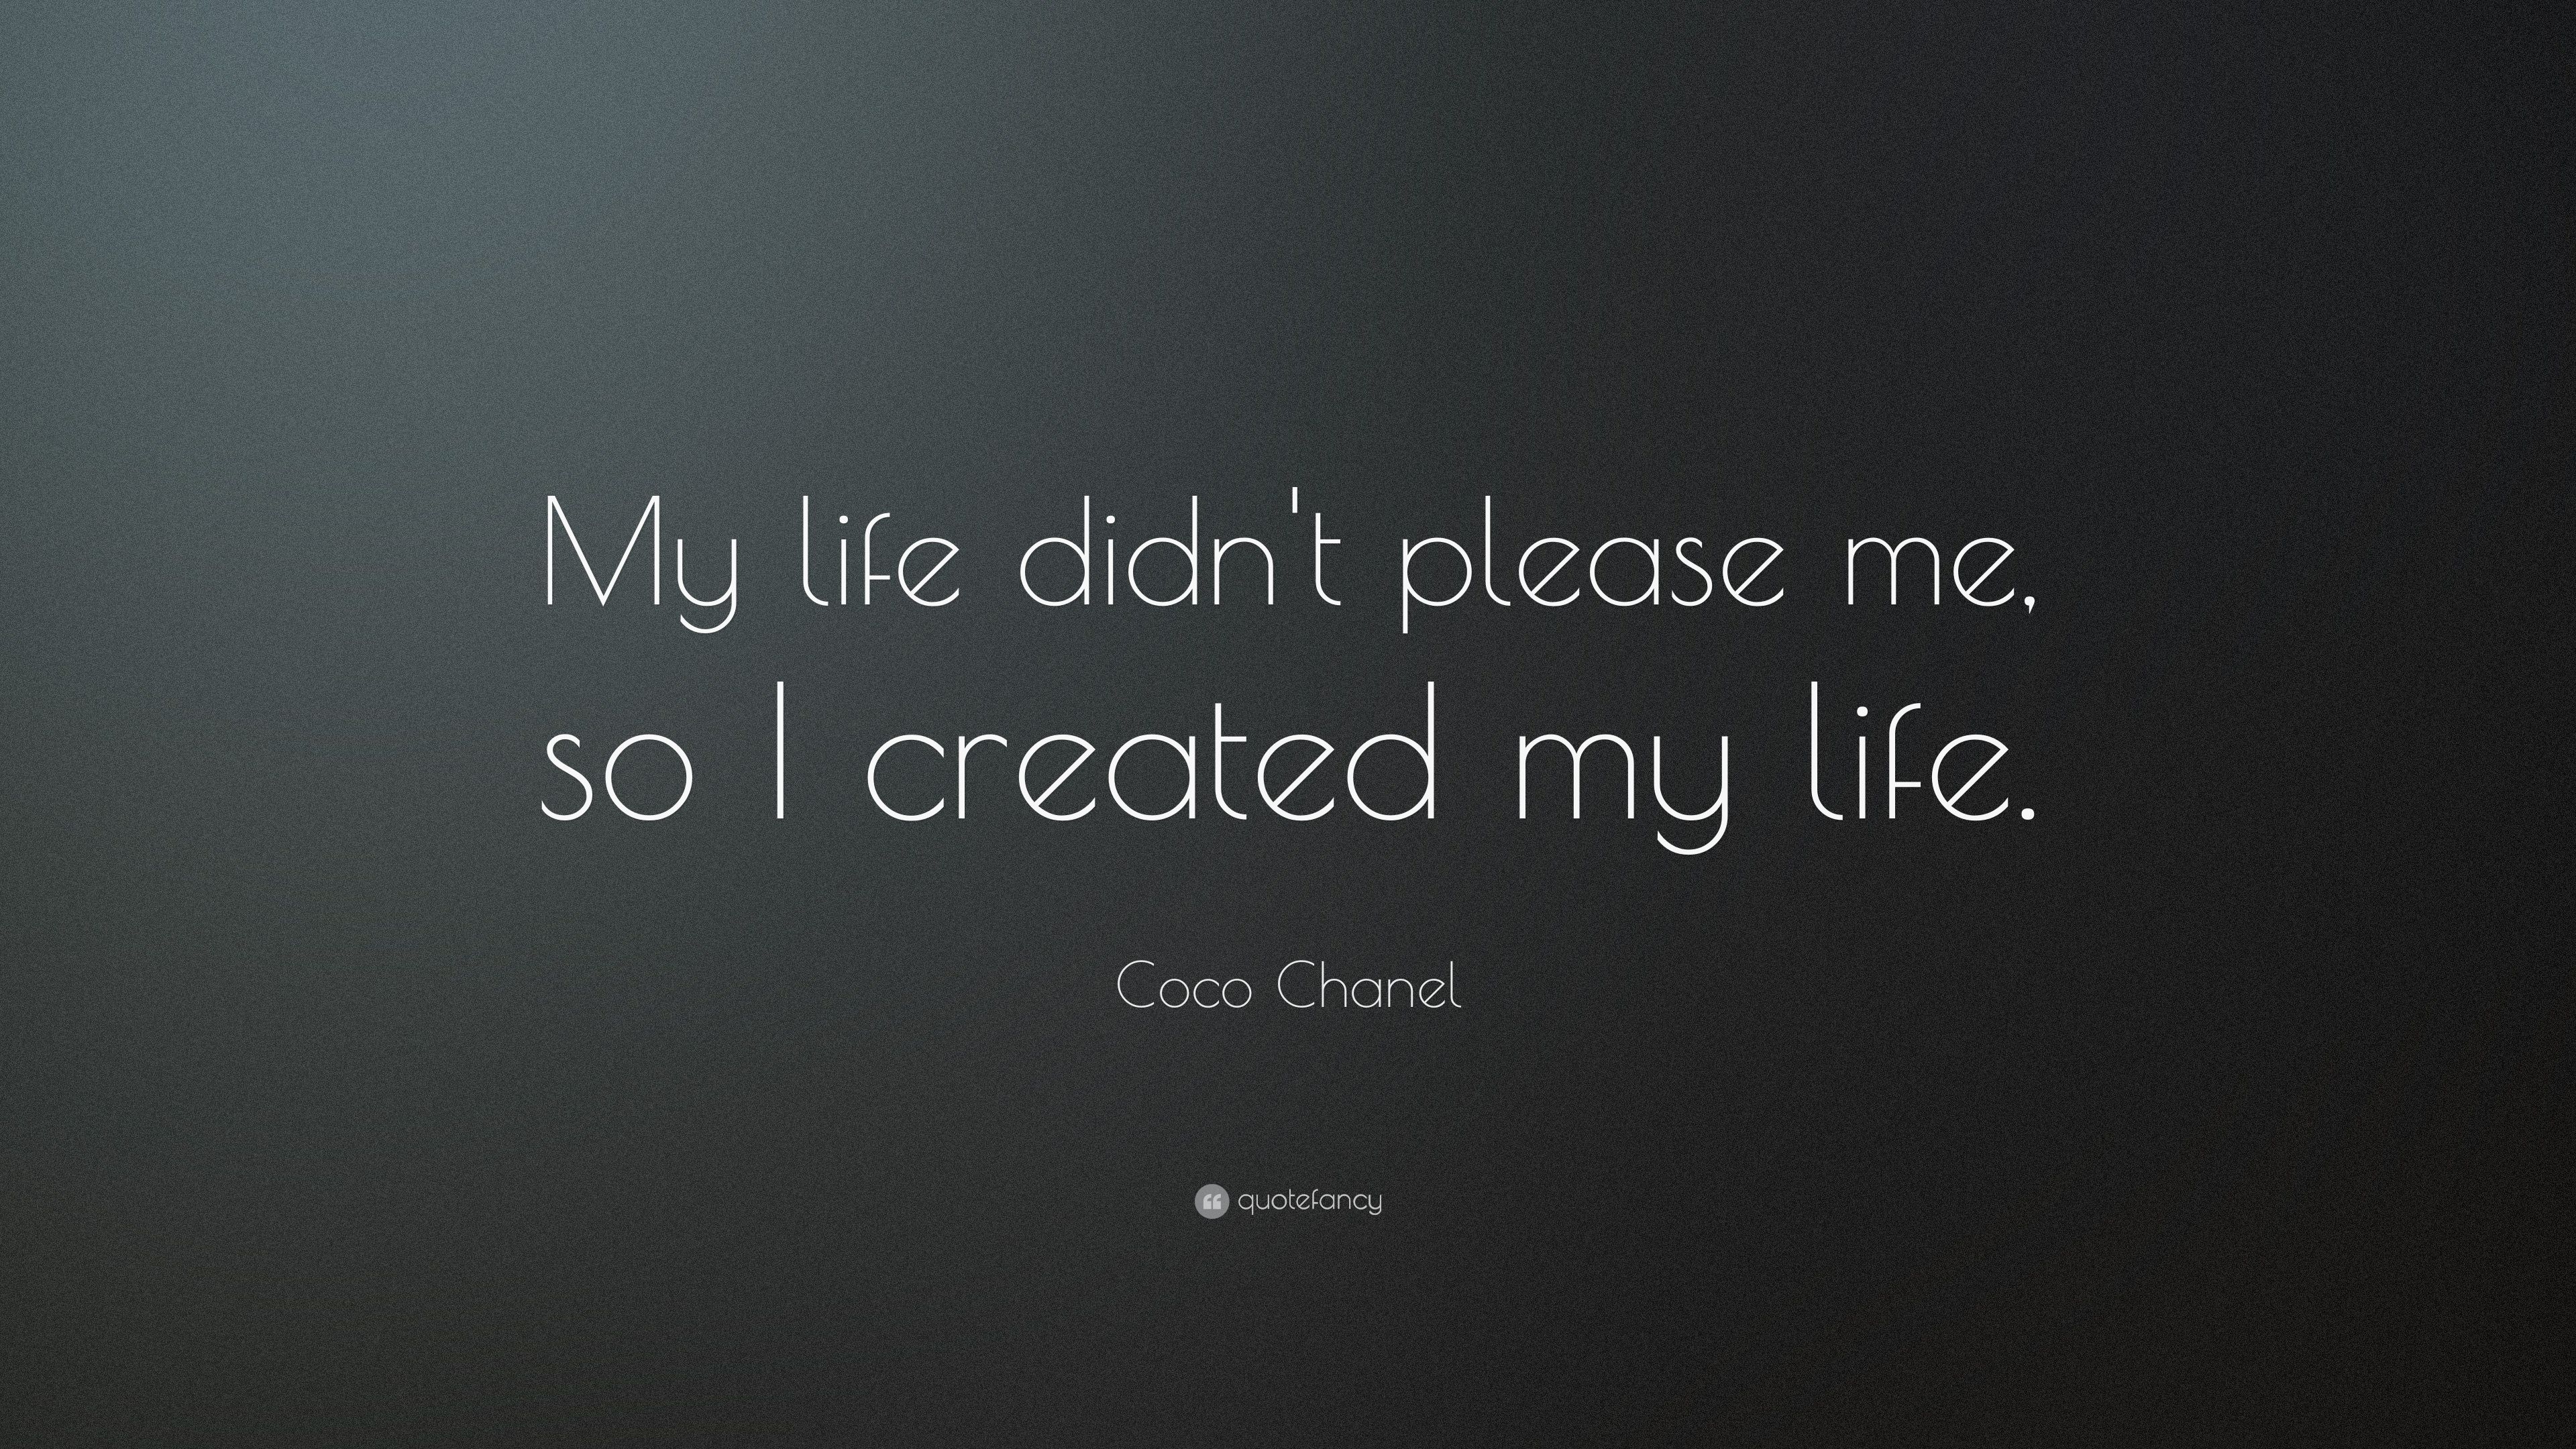 Coco Chanel Quote: “My life didn't please me, so I created my life